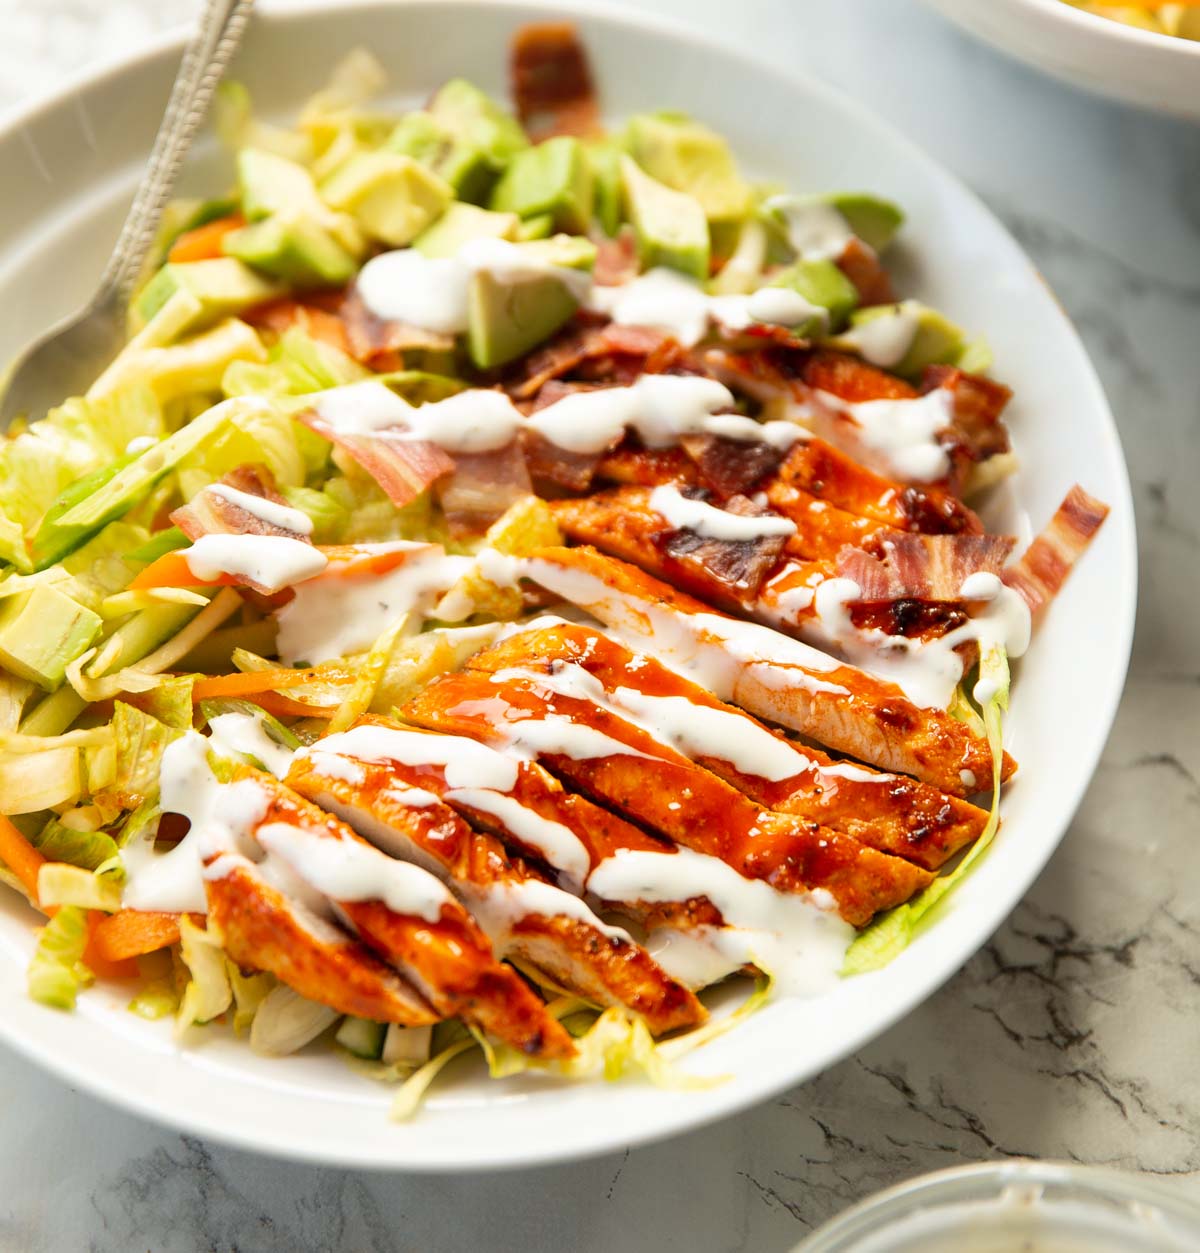 buffalo chicken salad served with ranch in large white shallow dish